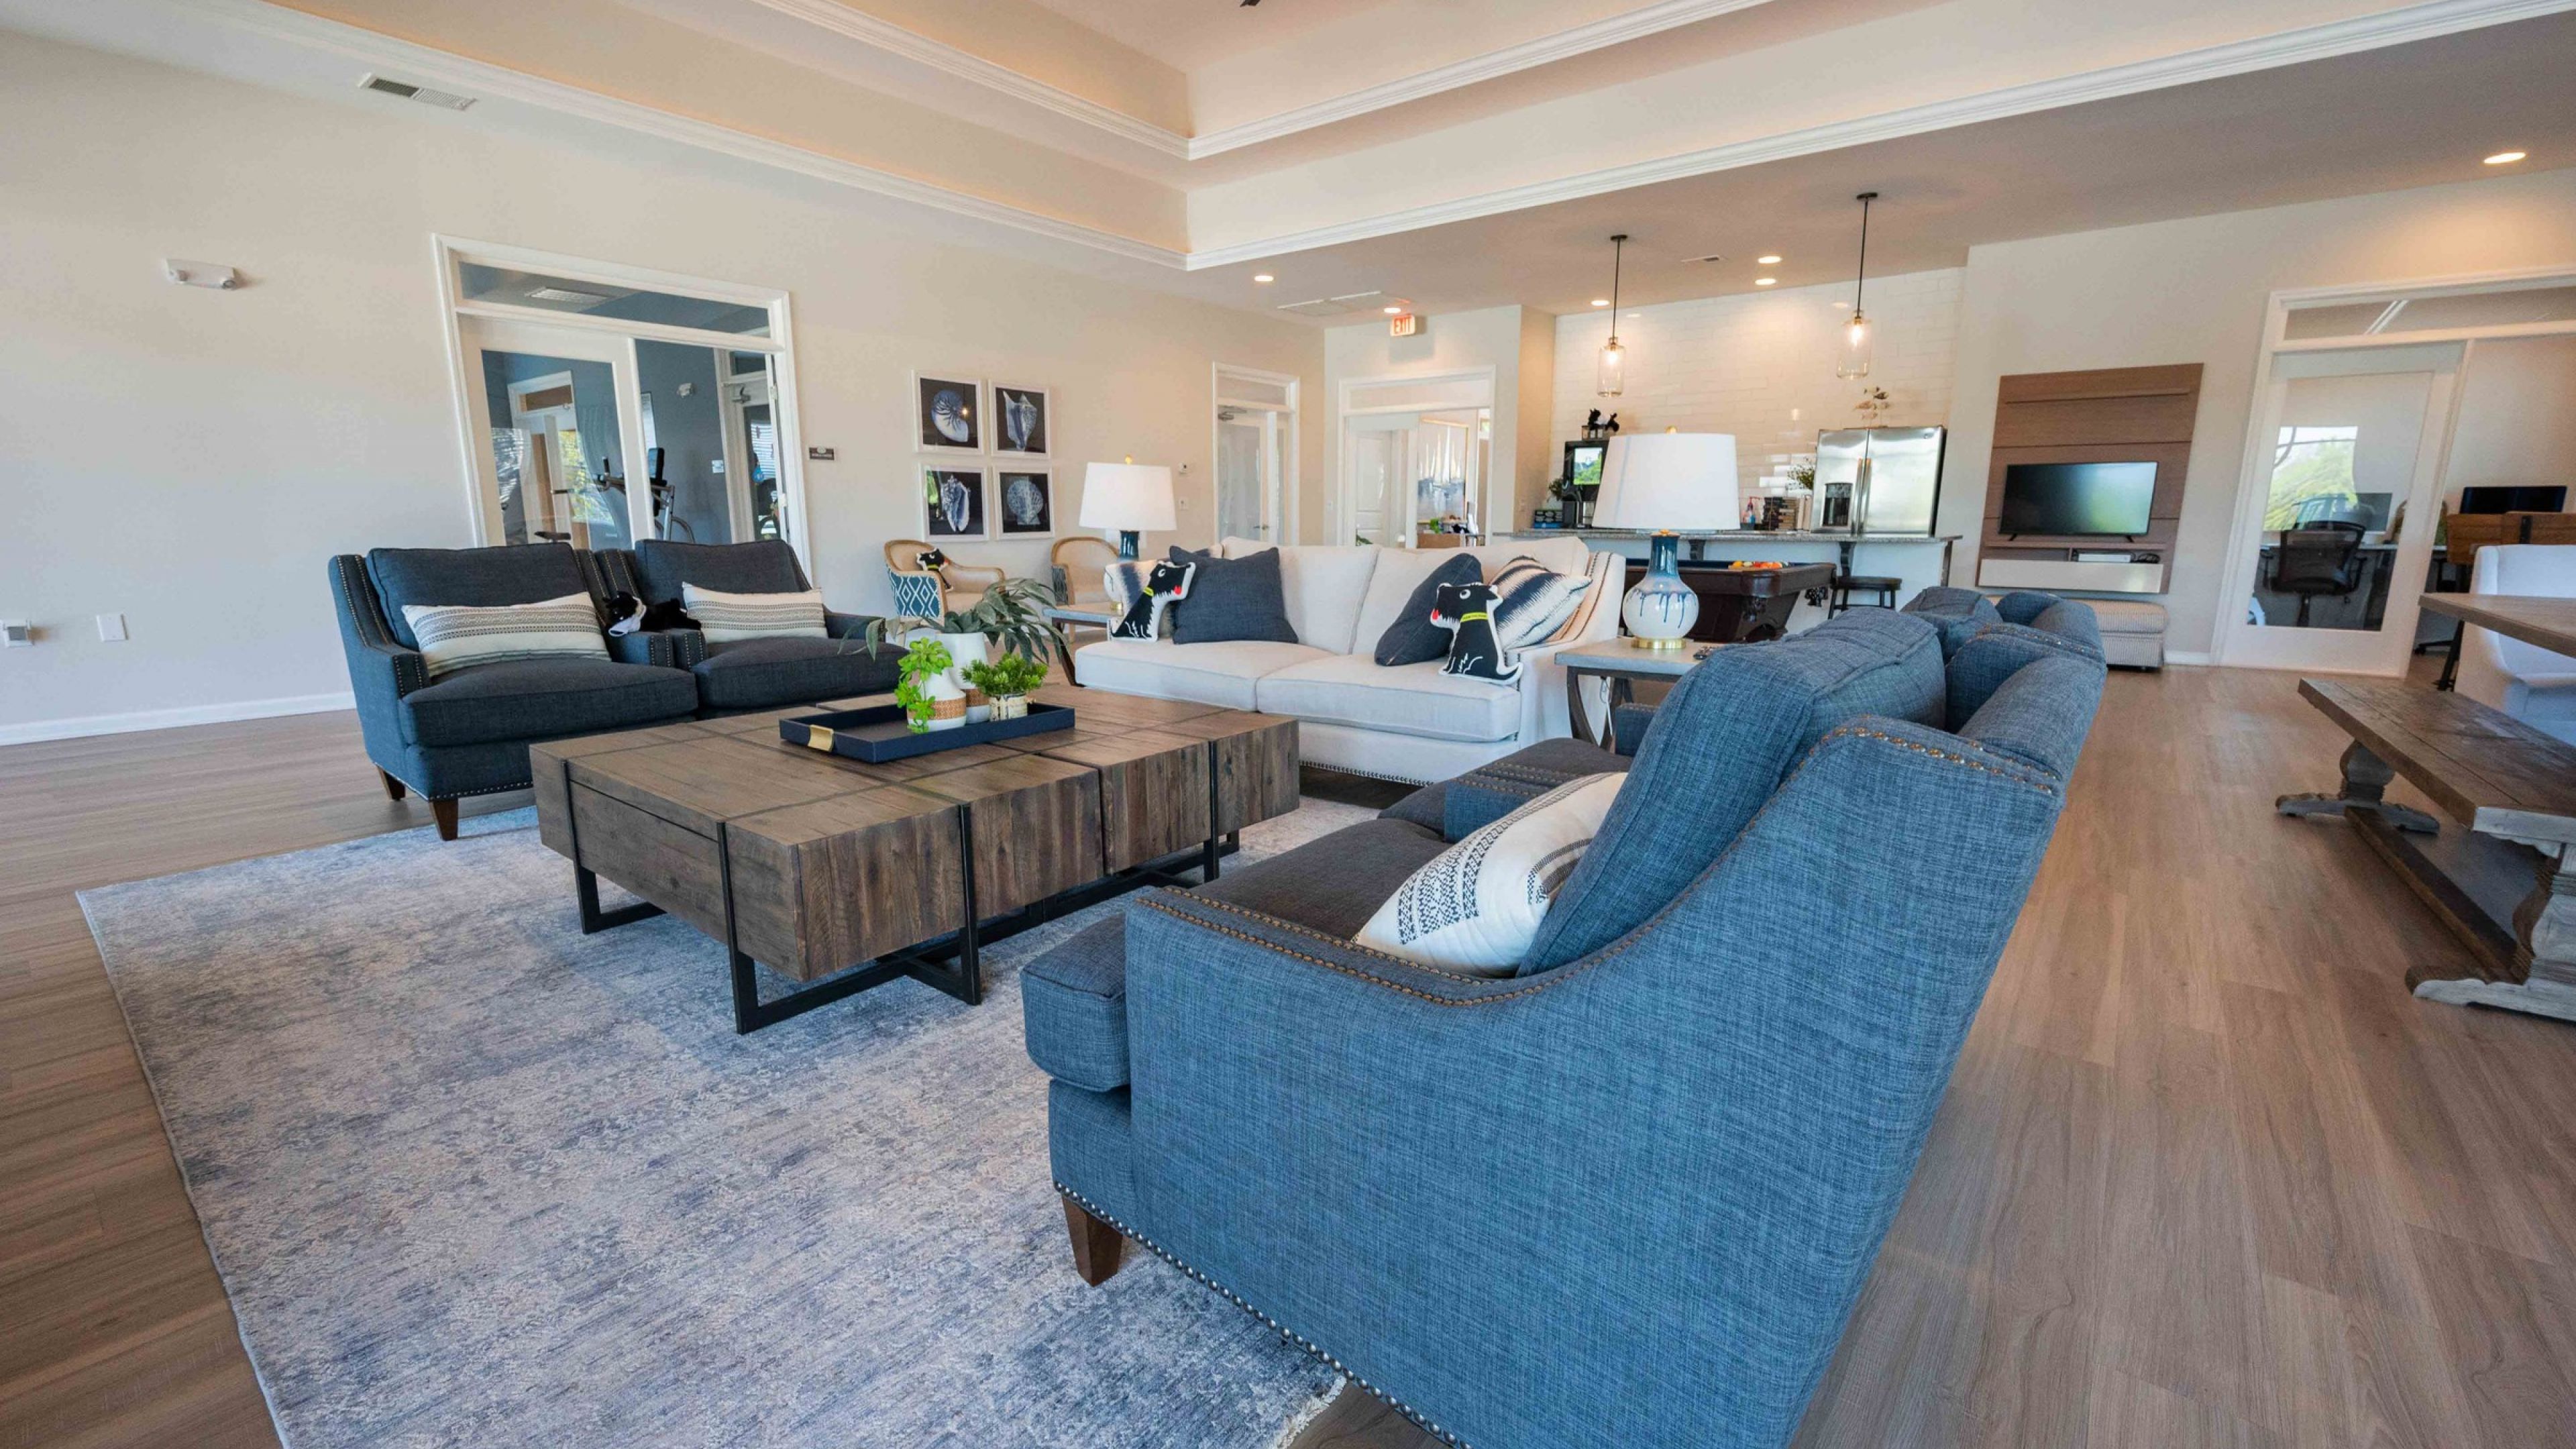 Hawthorne at the Bend resident clubhouse amenity with seating area and beautiful finishes